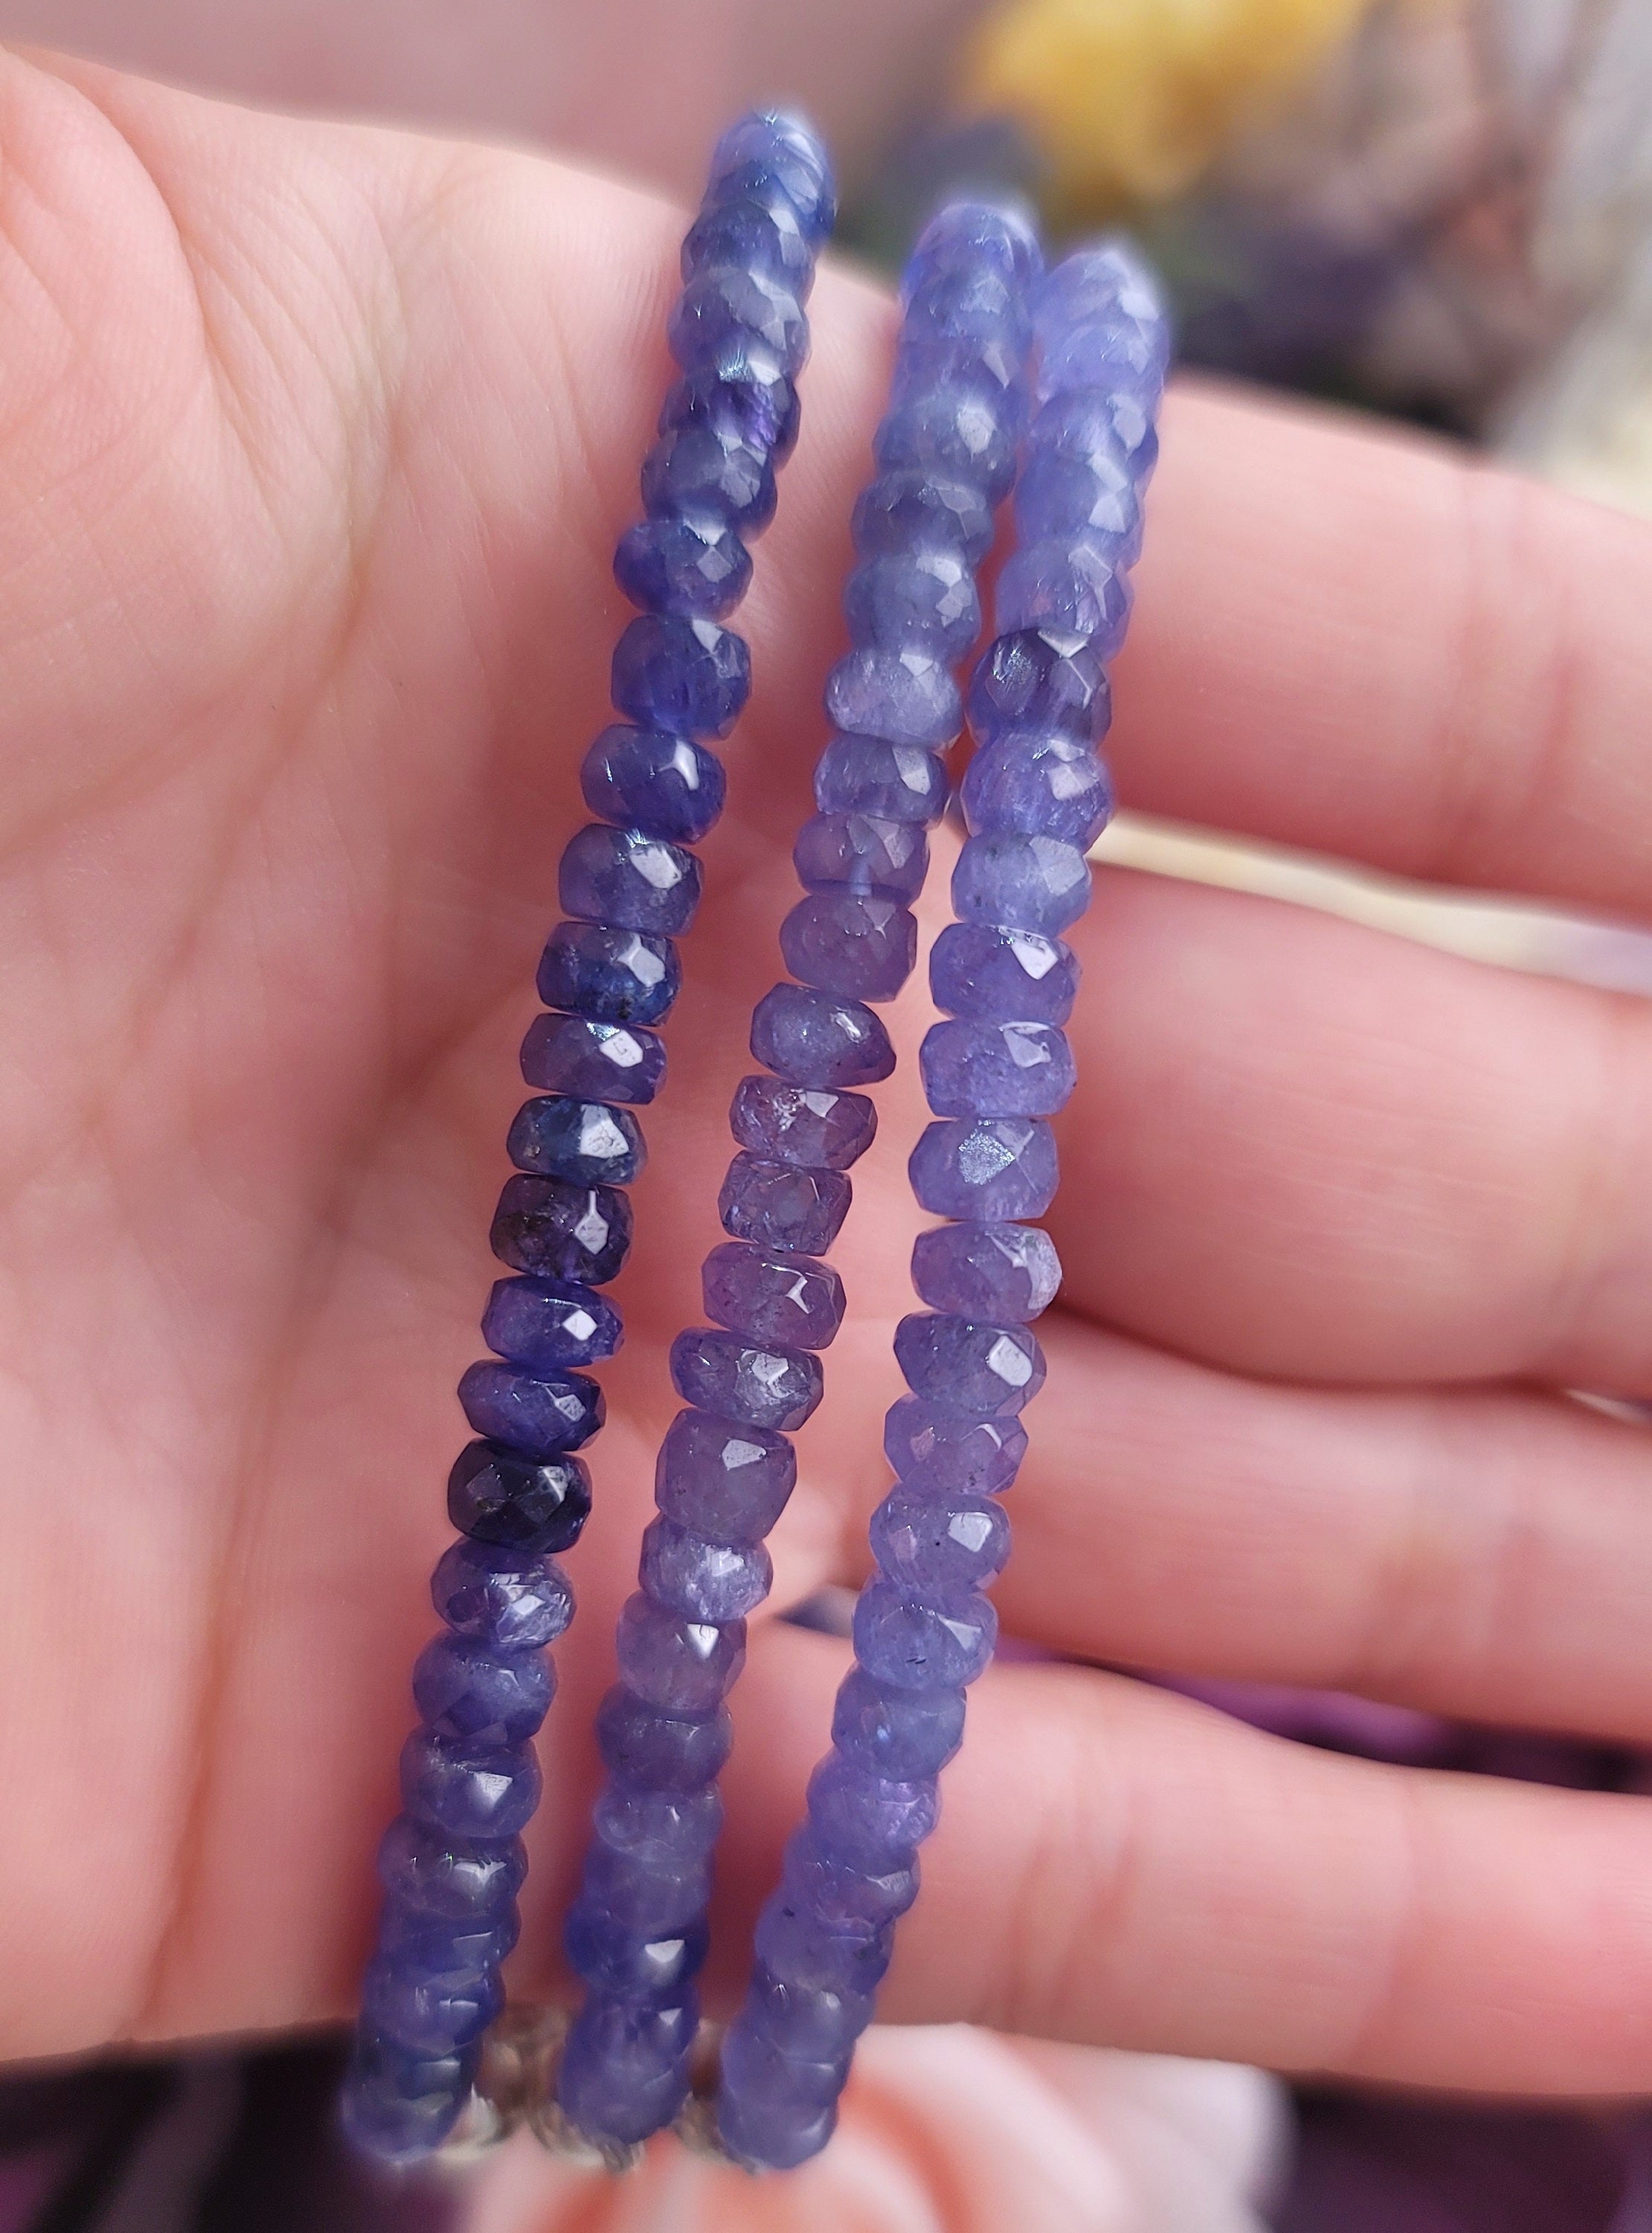 Tanzanite Micro Faceted Bracelet for Compassion, Intuition & Raising your Vibration